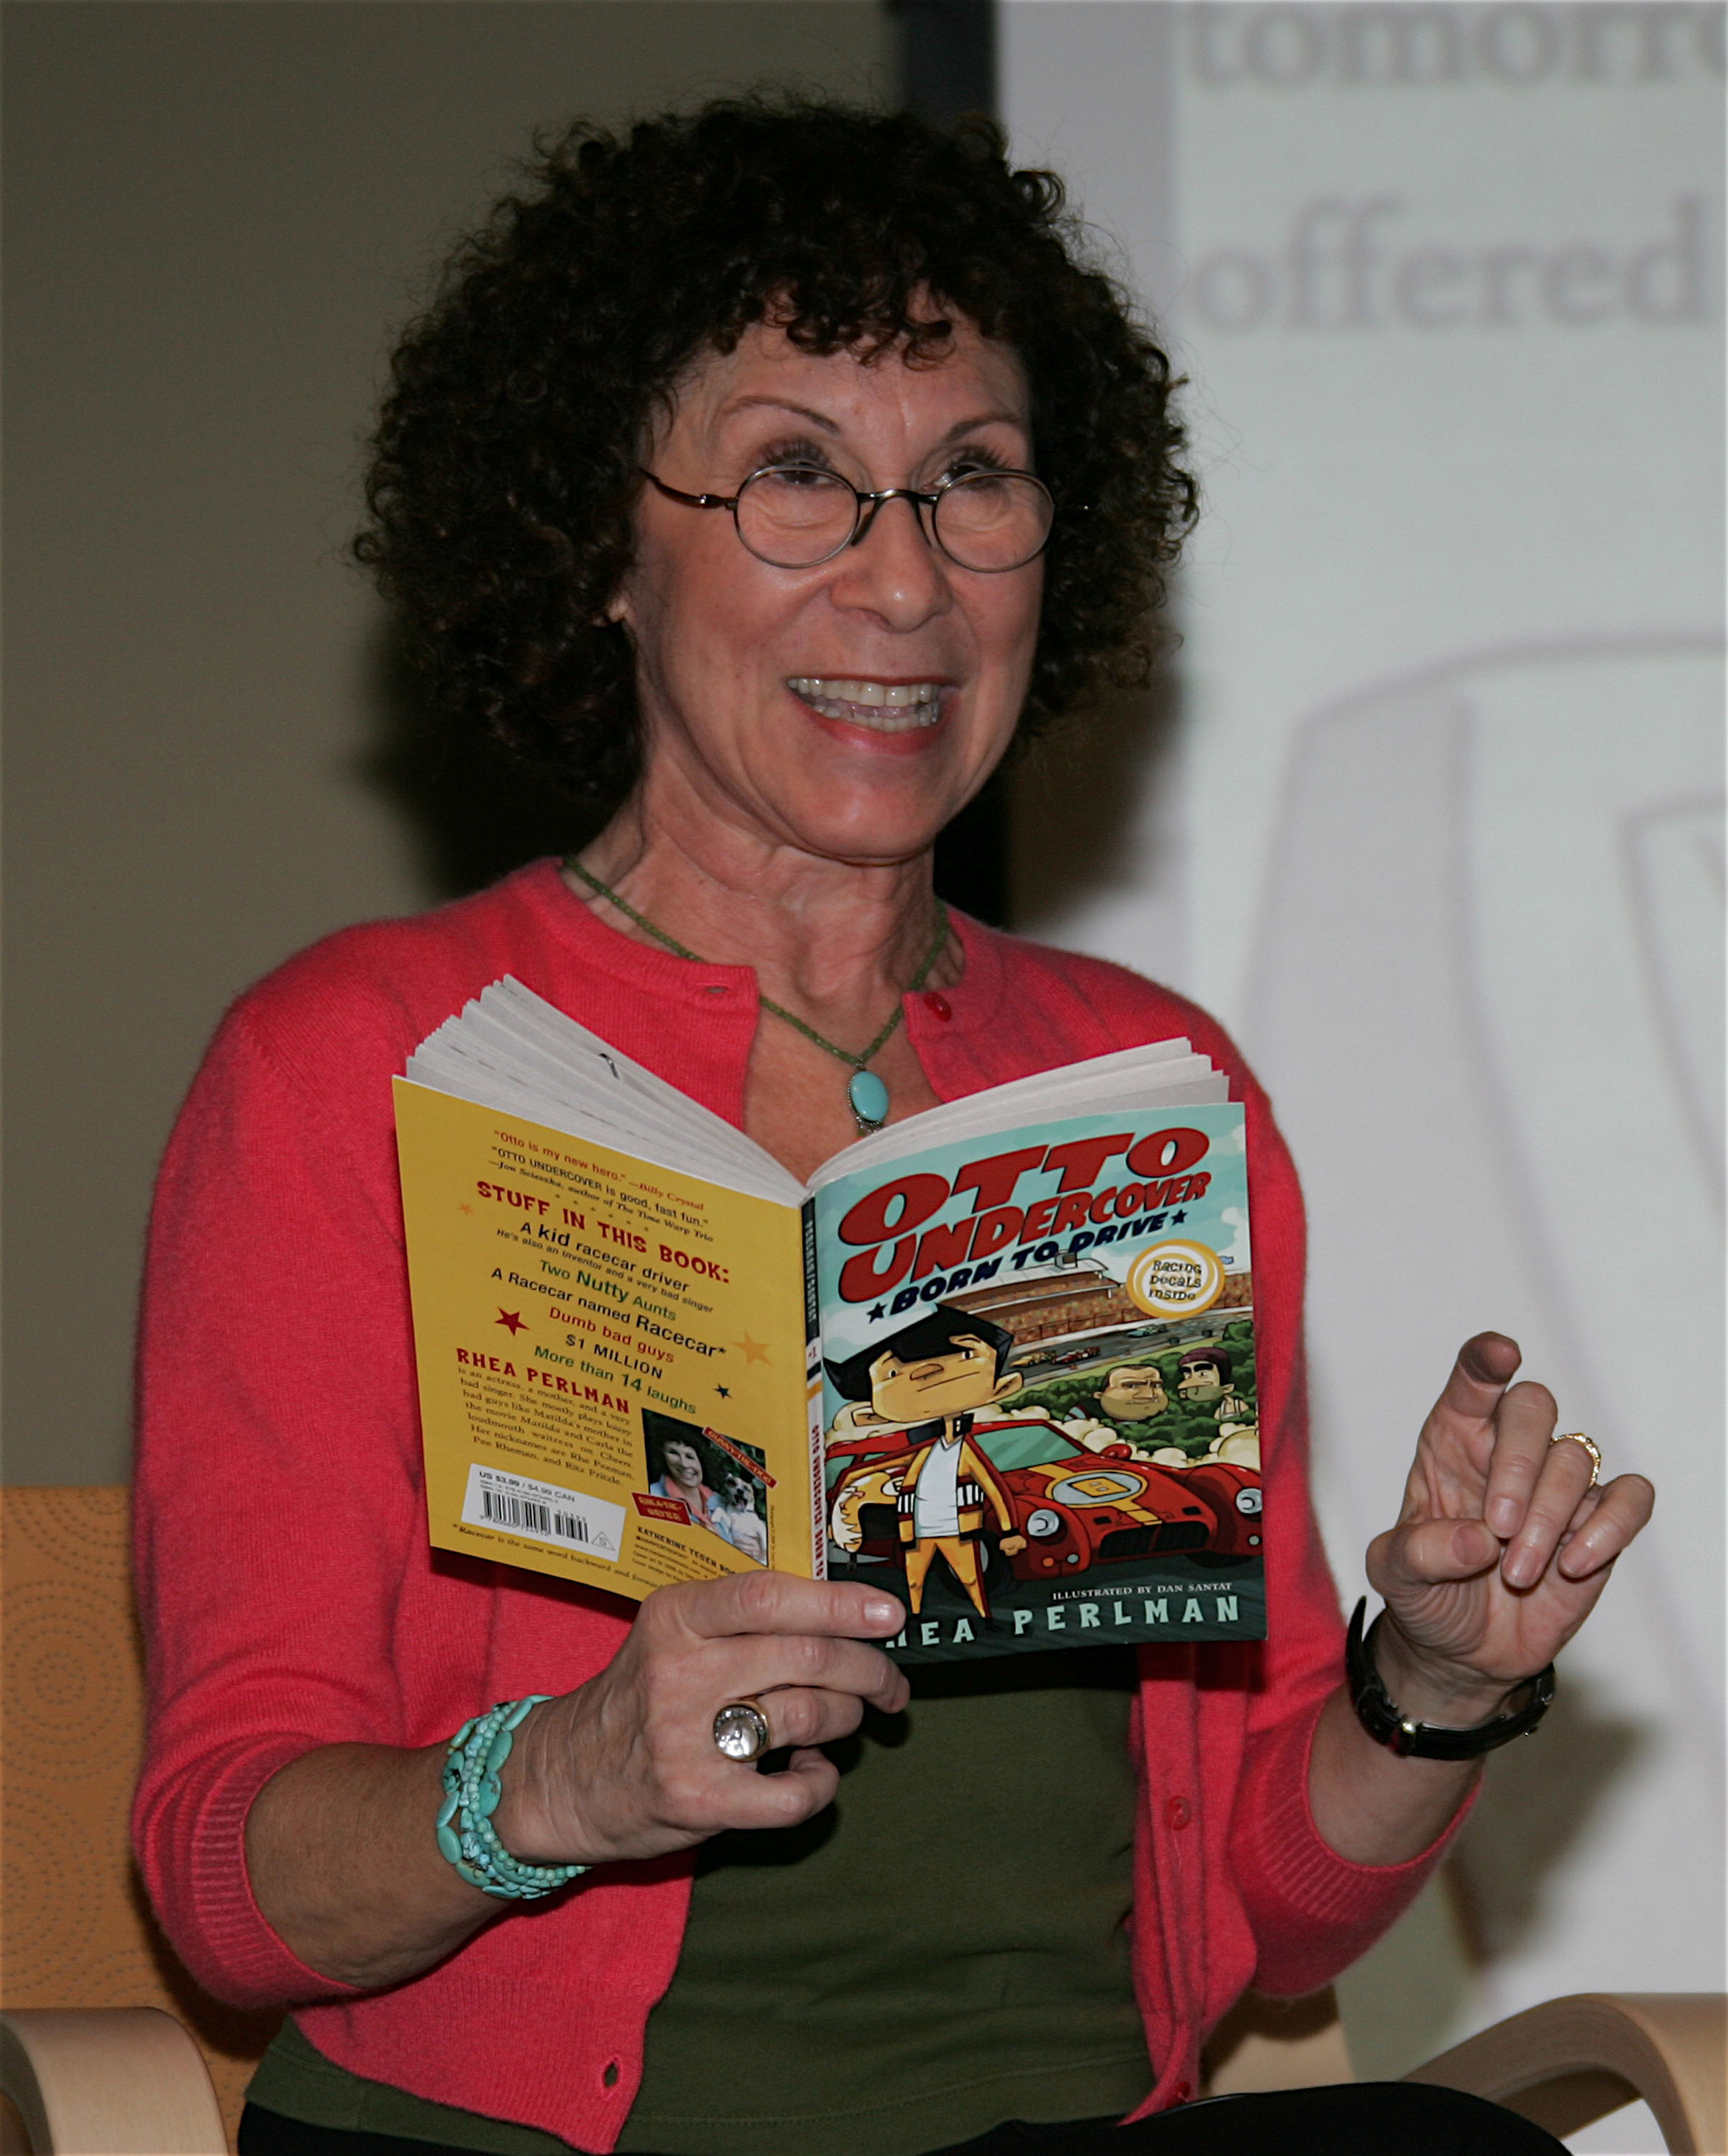 Rhea Perlman during the ribbon-cutting ceremony for the city of Santa Monica's Library in Santa Monica, California on January 7, 2006 | Source: Getty Images